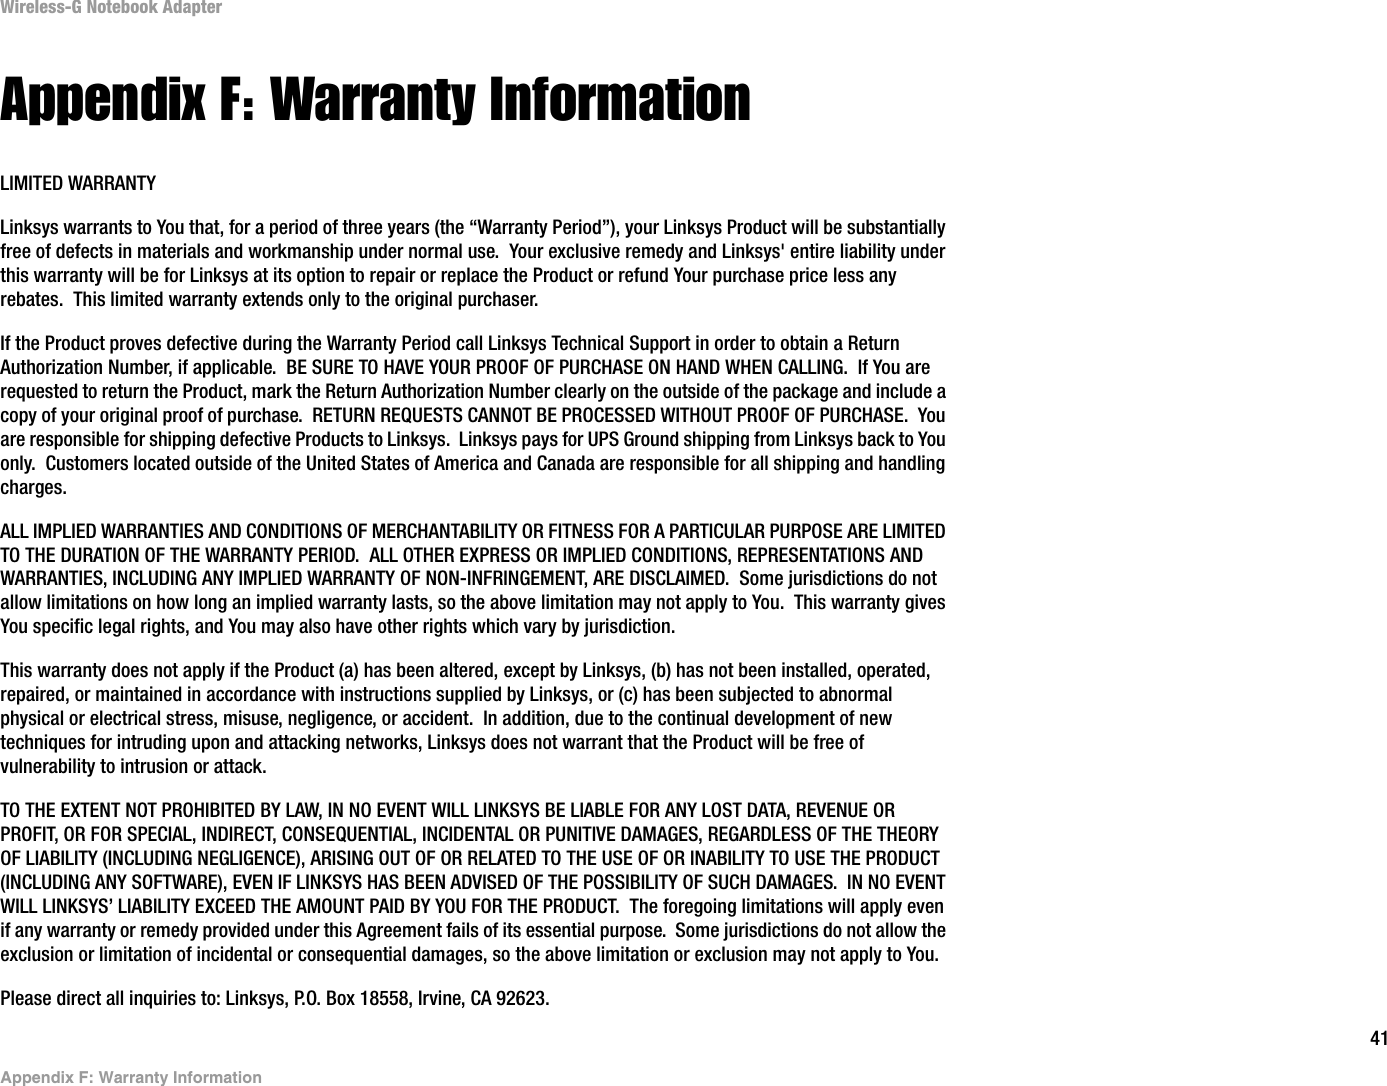 41Appendix F: Warranty InformationWireless-G Notebook AdapterAppendix F: Warranty InformationLIMITED WARRANTYLinksys warrants to You that, for a period of three years (the “Warranty Period”), your Linksys Product will be substantially free of defects in materials and workmanship under normal use.  Your exclusive remedy and Linksys&apos; entire liability under this warranty will be for Linksys at its option to repair or replace the Product or refund Your purchase price less any rebates.  This limited warranty extends only to the original purchaser.  If the Product proves defective during the Warranty Period call Linksys Technical Support in order to obtain a Return Authorization Number, if applicable.  BE SURE TO HAVE YOUR PROOF OF PURCHASE ON HAND WHEN CALLING.  If You are requested to return the Product, mark the Return Authorization Number clearly on the outside of the package and include a copy of your original proof of purchase.  RETURN REQUESTS CANNOT BE PROCESSED WITHOUT PROOF OF PURCHASE.  You are responsible for shipping defective Products to Linksys.  Linksys pays for UPS Ground shipping from Linksys back to You only.  Customers located outside of the United States of America and Canada are responsible for all shipping and handling charges. ALL IMPLIED WARRANTIES AND CONDITIONS OF MERCHANTABILITY OR FITNESS FOR A PARTICULAR PURPOSE ARE LIMITED TO THE DURATION OF THE WARRANTY PERIOD.  ALL OTHER EXPRESS OR IMPLIED CONDITIONS, REPRESENTATIONS AND WARRANTIES, INCLUDING ANY IMPLIED WARRANTY OF NON-INFRINGEMENT, ARE DISCLAIMED.  Some jurisdictions do not allow limitations on how long an implied warranty lasts, so the above limitation may not apply to You.  This warranty gives You specific legal rights, and You may also have other rights which vary by jurisdiction.This warranty does not apply if the Product (a) has been altered, except by Linksys, (b) has not been installed, operated, repaired, or maintained in accordance with instructions supplied by Linksys, or (c) has been subjected to abnormal physical or electrical stress, misuse, negligence, or accident.  In addition, due to the continual development of new techniques for intruding upon and attacking networks, Linksys does not warrant that the Product will be free of vulnerability to intrusion or attack.TO THE EXTENT NOT PROHIBITED BY LAW, IN NO EVENT WILL LINKSYS BE LIABLE FOR ANY LOST DATA, REVENUE OR PROFIT, OR FOR SPECIAL, INDIRECT, CONSEQUENTIAL, INCIDENTAL OR PUNITIVE DAMAGES, REGARDLESS OF THE THEORY OF LIABILITY (INCLUDING NEGLIGENCE), ARISING OUT OF OR RELATED TO THE USE OF OR INABILITY TO USE THE PRODUCT (INCLUDING ANY SOFTWARE), EVEN IF LINKSYS HAS BEEN ADVISED OF THE POSSIBILITY OF SUCH DAMAGES.  IN NO EVENT WILL LINKSYS’ LIABILITY EXCEED THE AMOUNT PAID BY YOU FOR THE PRODUCT.  The foregoing limitations will apply even if any warranty or remedy provided under this Agreement fails of its essential purpose.  Some jurisdictions do not allow the exclusion or limitation of incidental or consequential damages, so the above limitation or exclusion may not apply to You.Please direct all inquiries to: Linksys, P.O. Box 18558, Irvine, CA 92623.